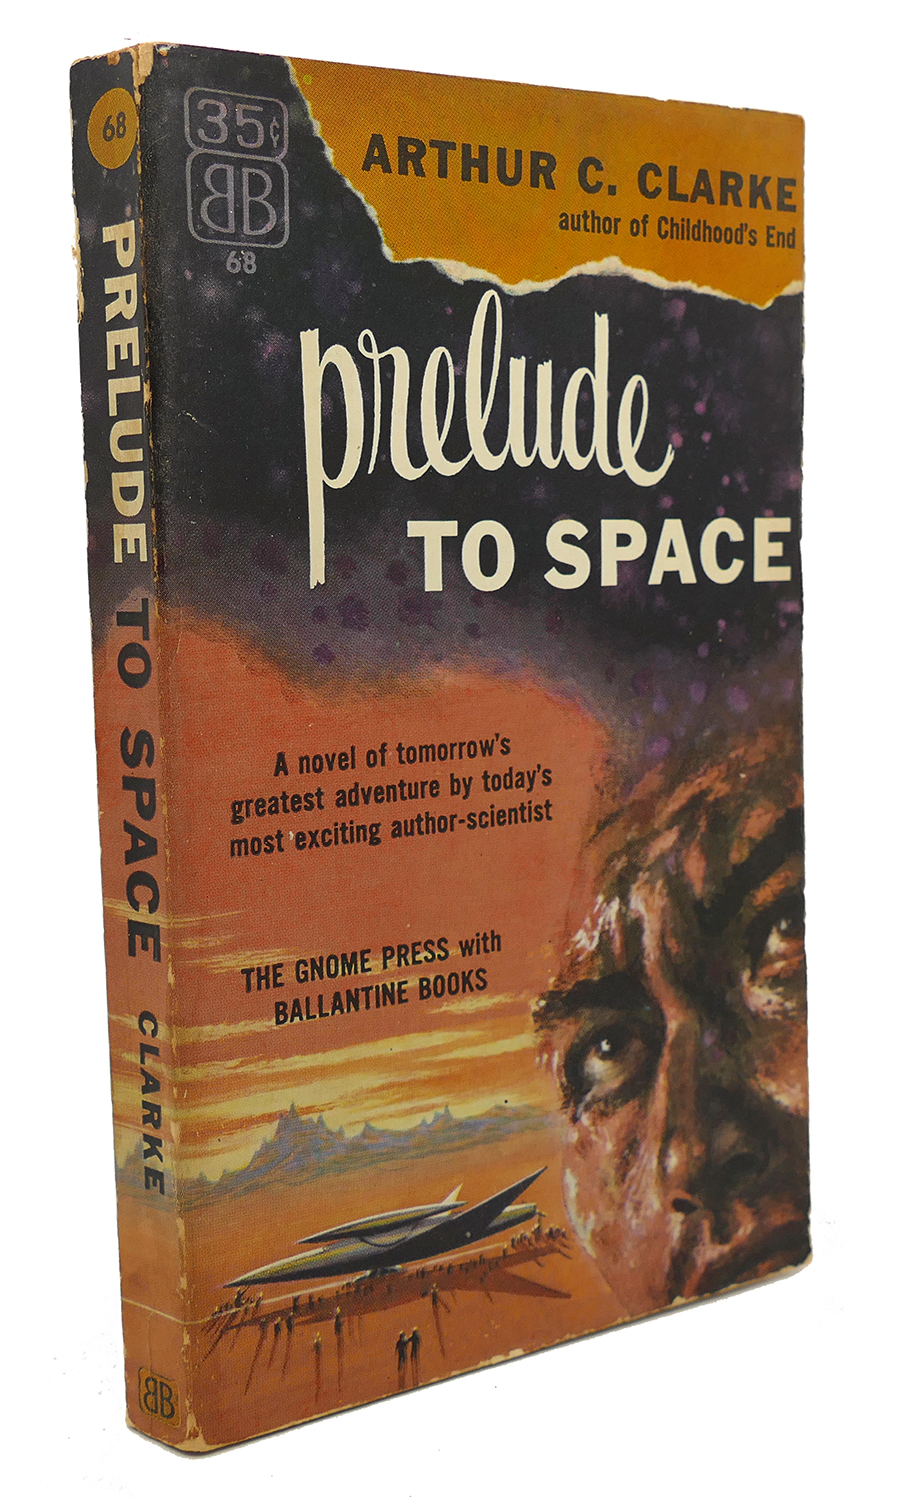 PRELUDE TO SPACE by Arthur C. Clarke: Softcover (1954) First Edition ...